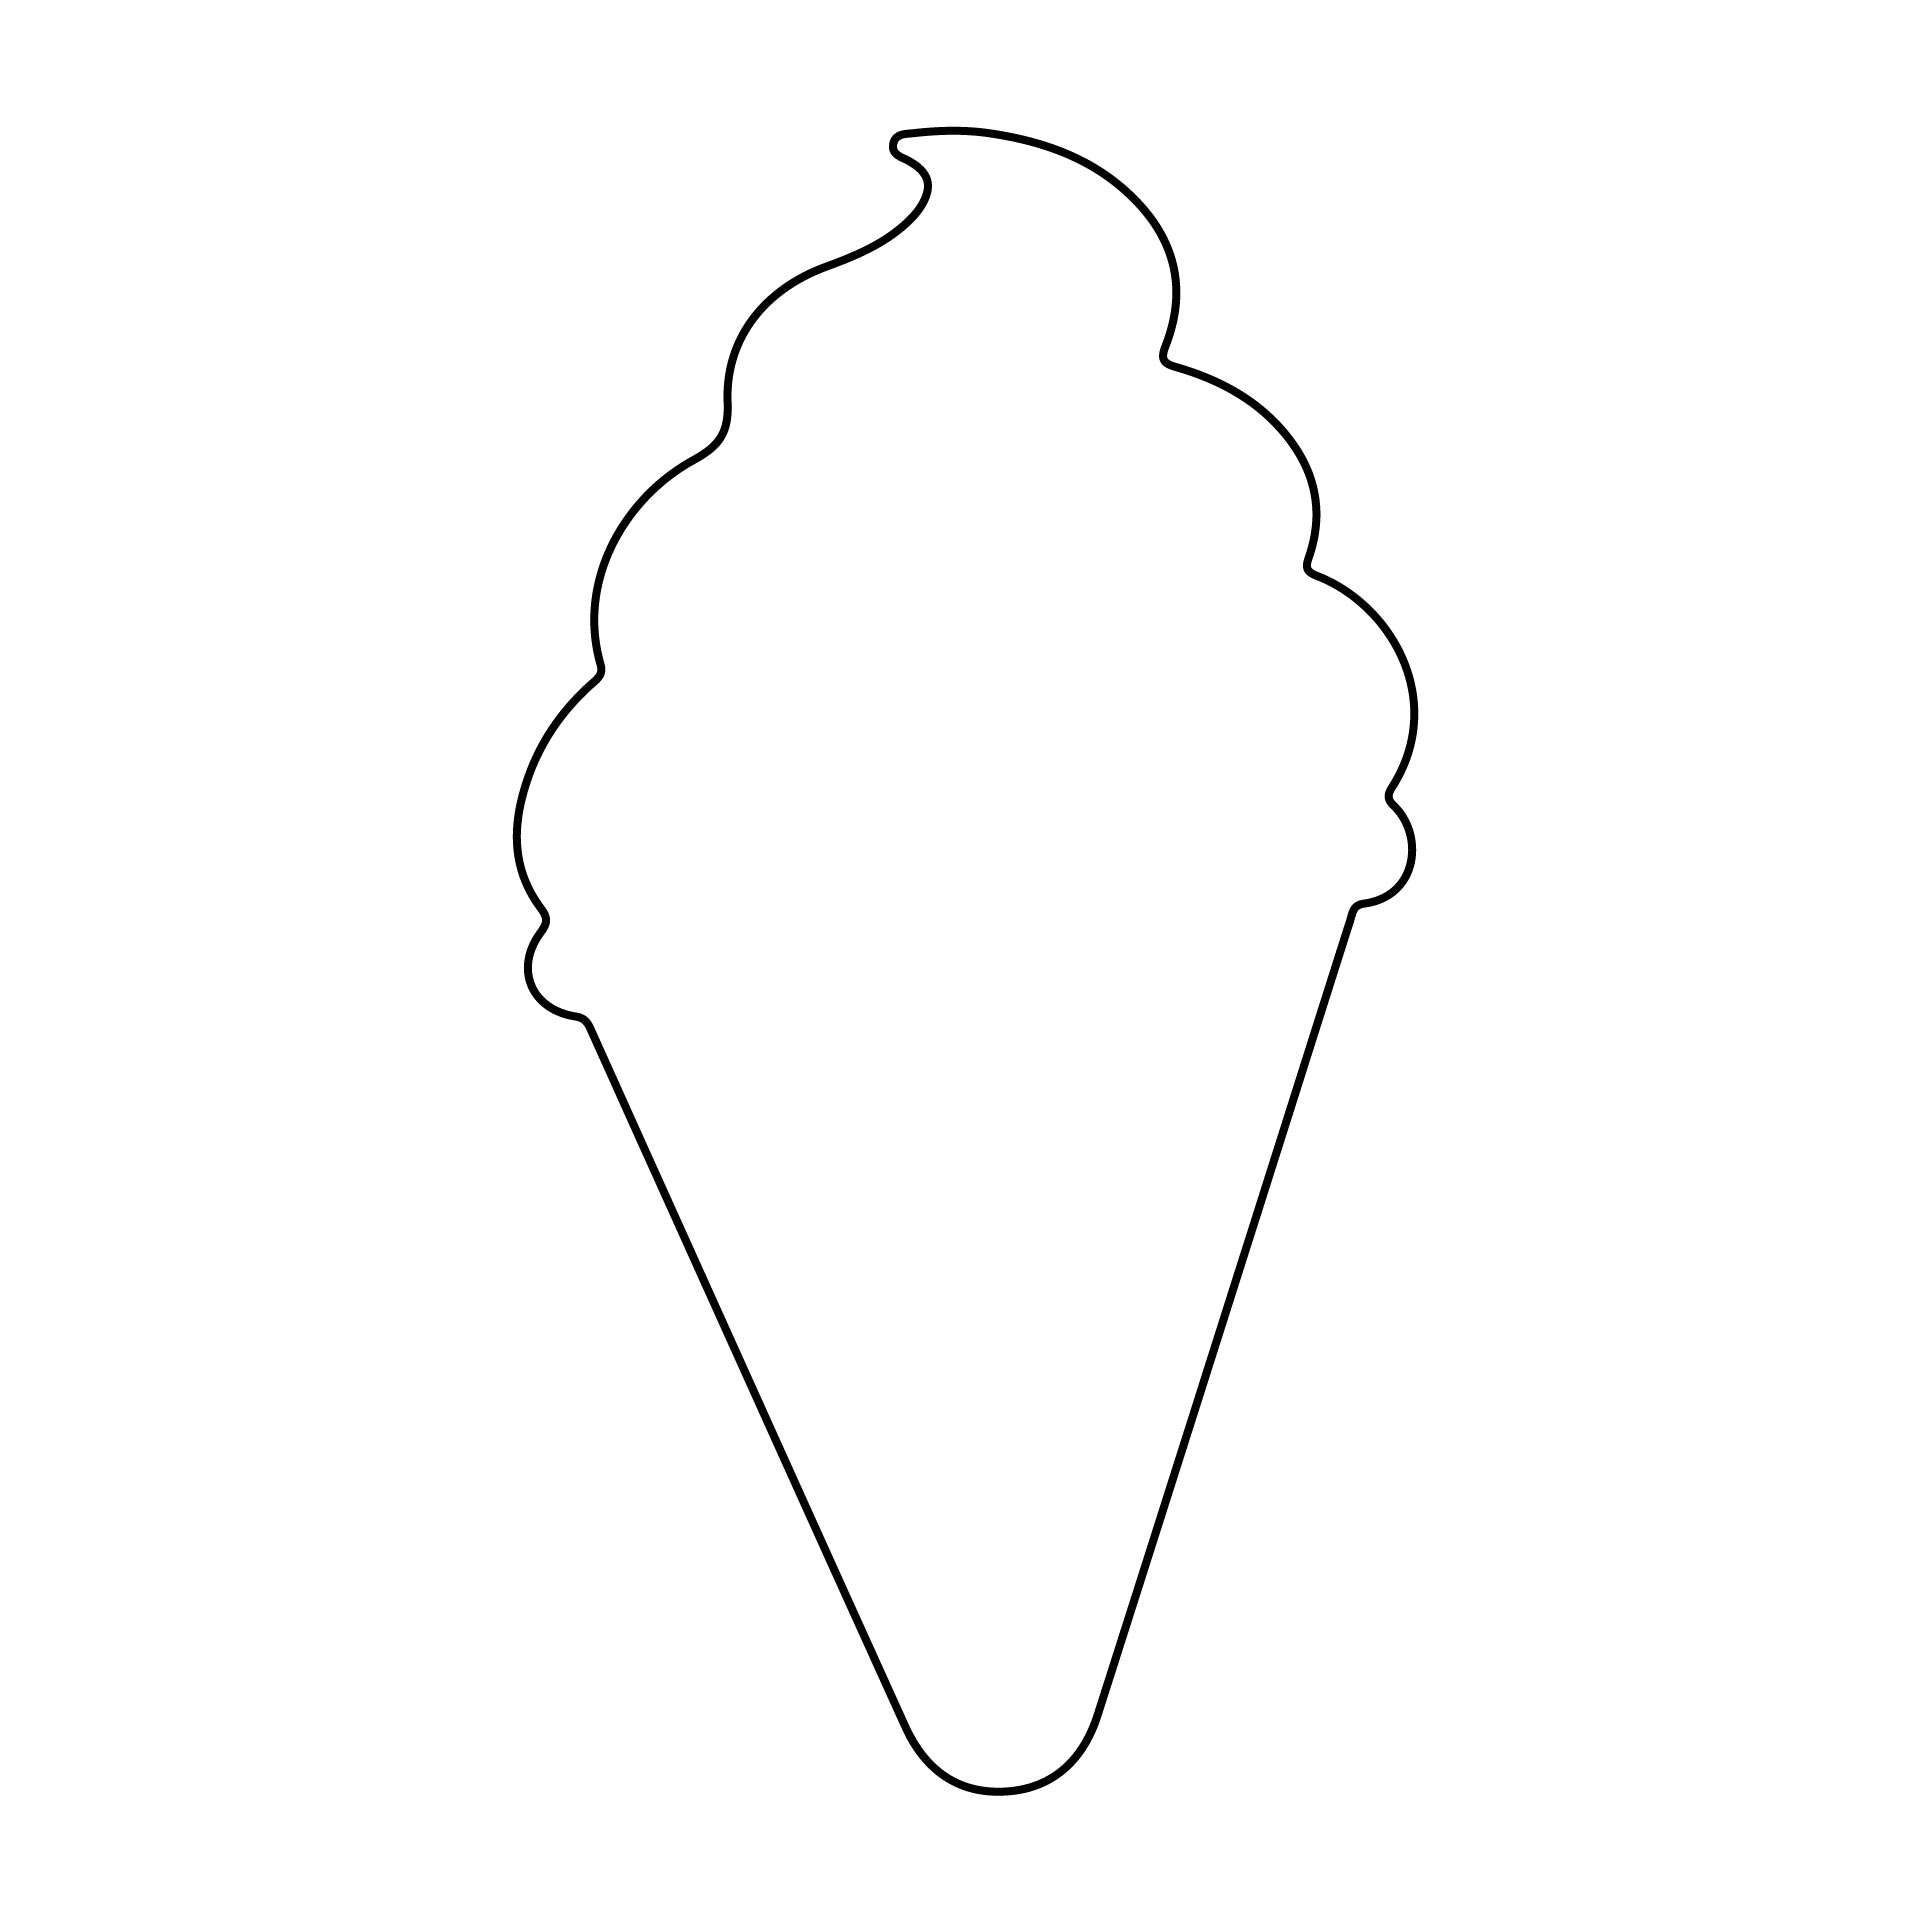 10-best-ice-cream-cone-pattern-printable-pdf-for-free-at-printablee